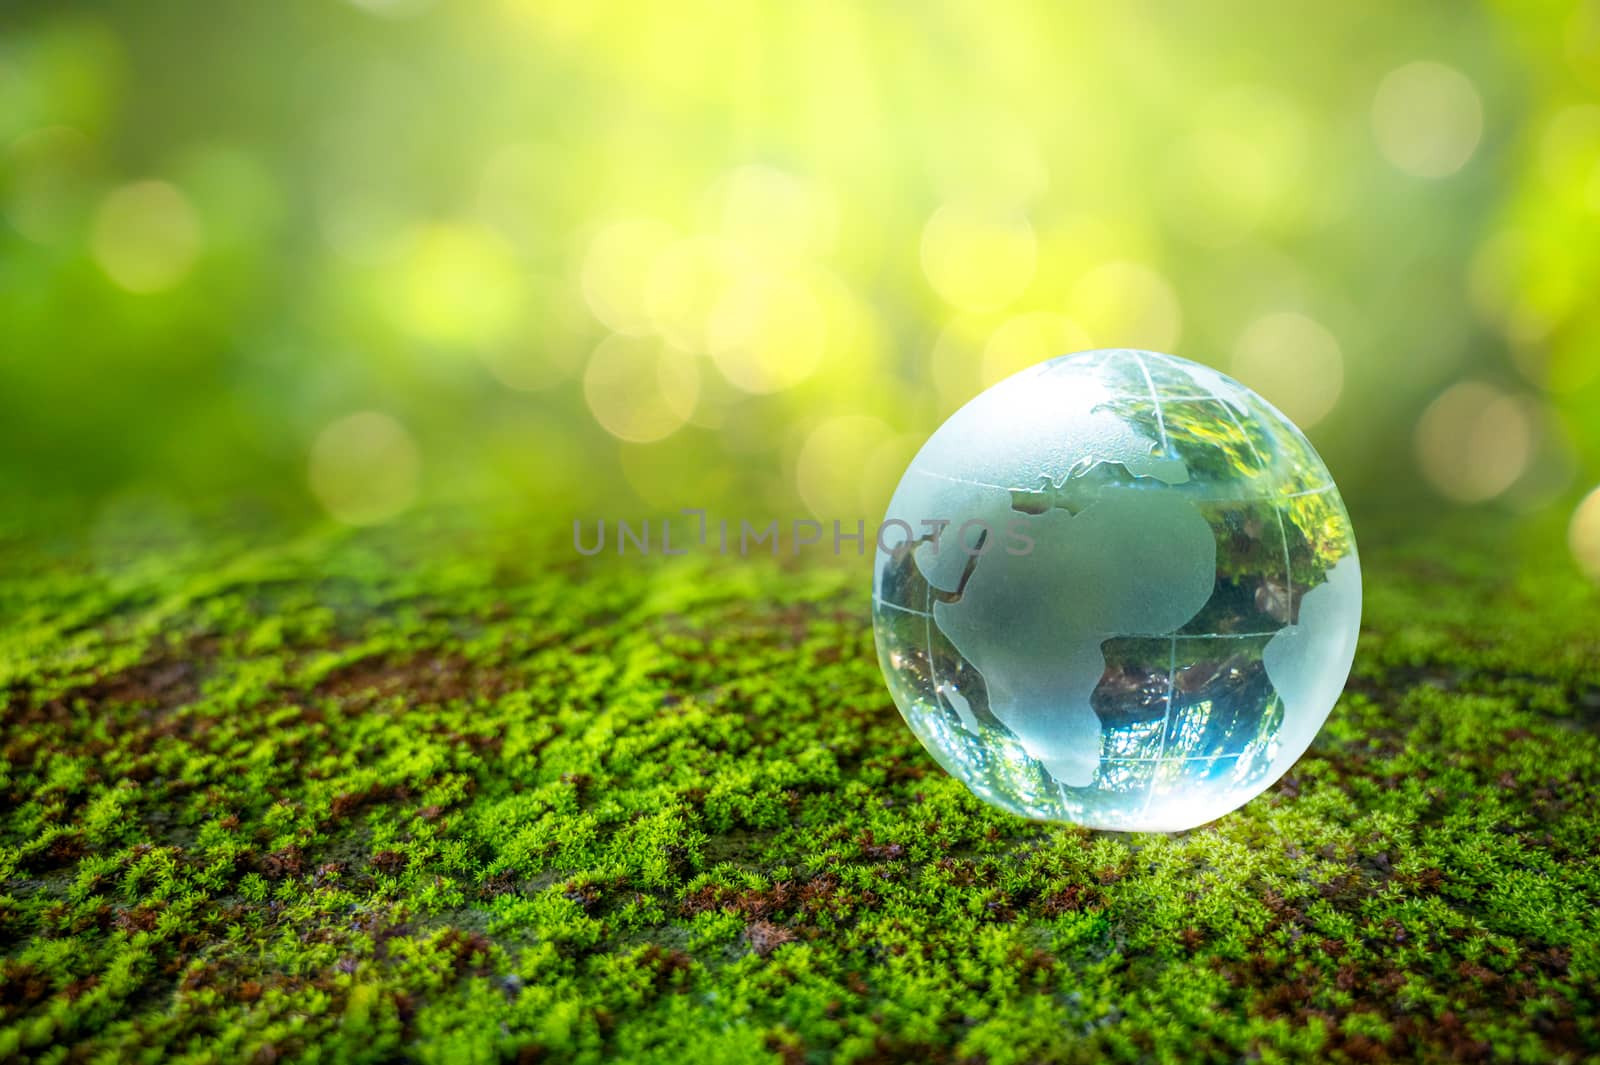 The crystal ball stands on the green grass. Concept day earth Save the world save environment by sarayut_thaneerat